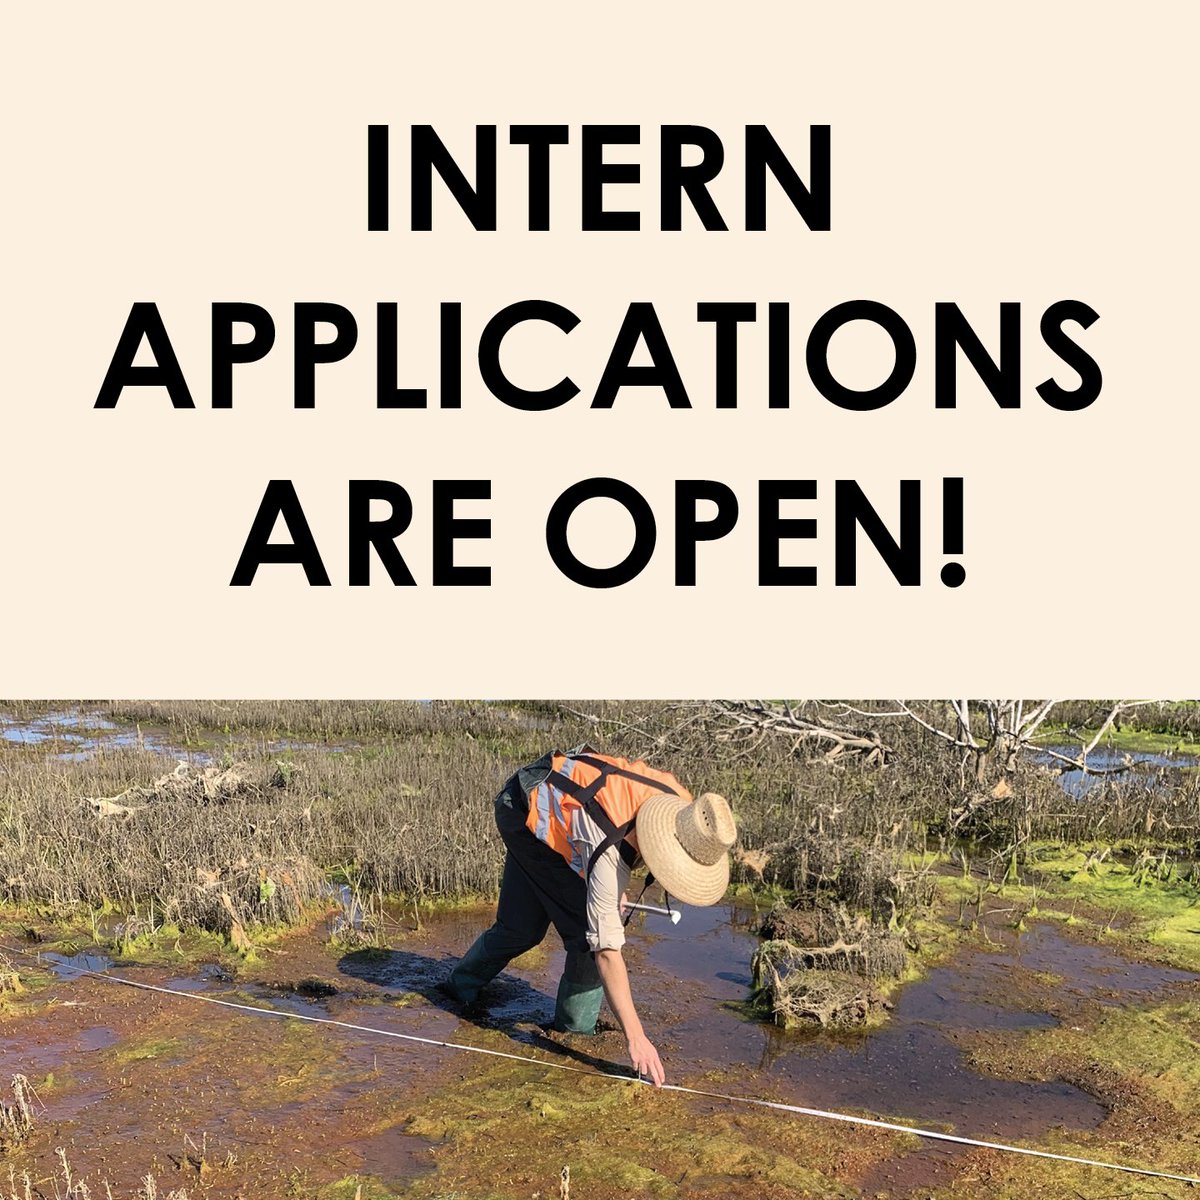 Intern applications are now open! Head over to bolsachica.org/internships/ for information on how to apply to join our amazing team! Applications are open through the end of business on Friday, September 15th.